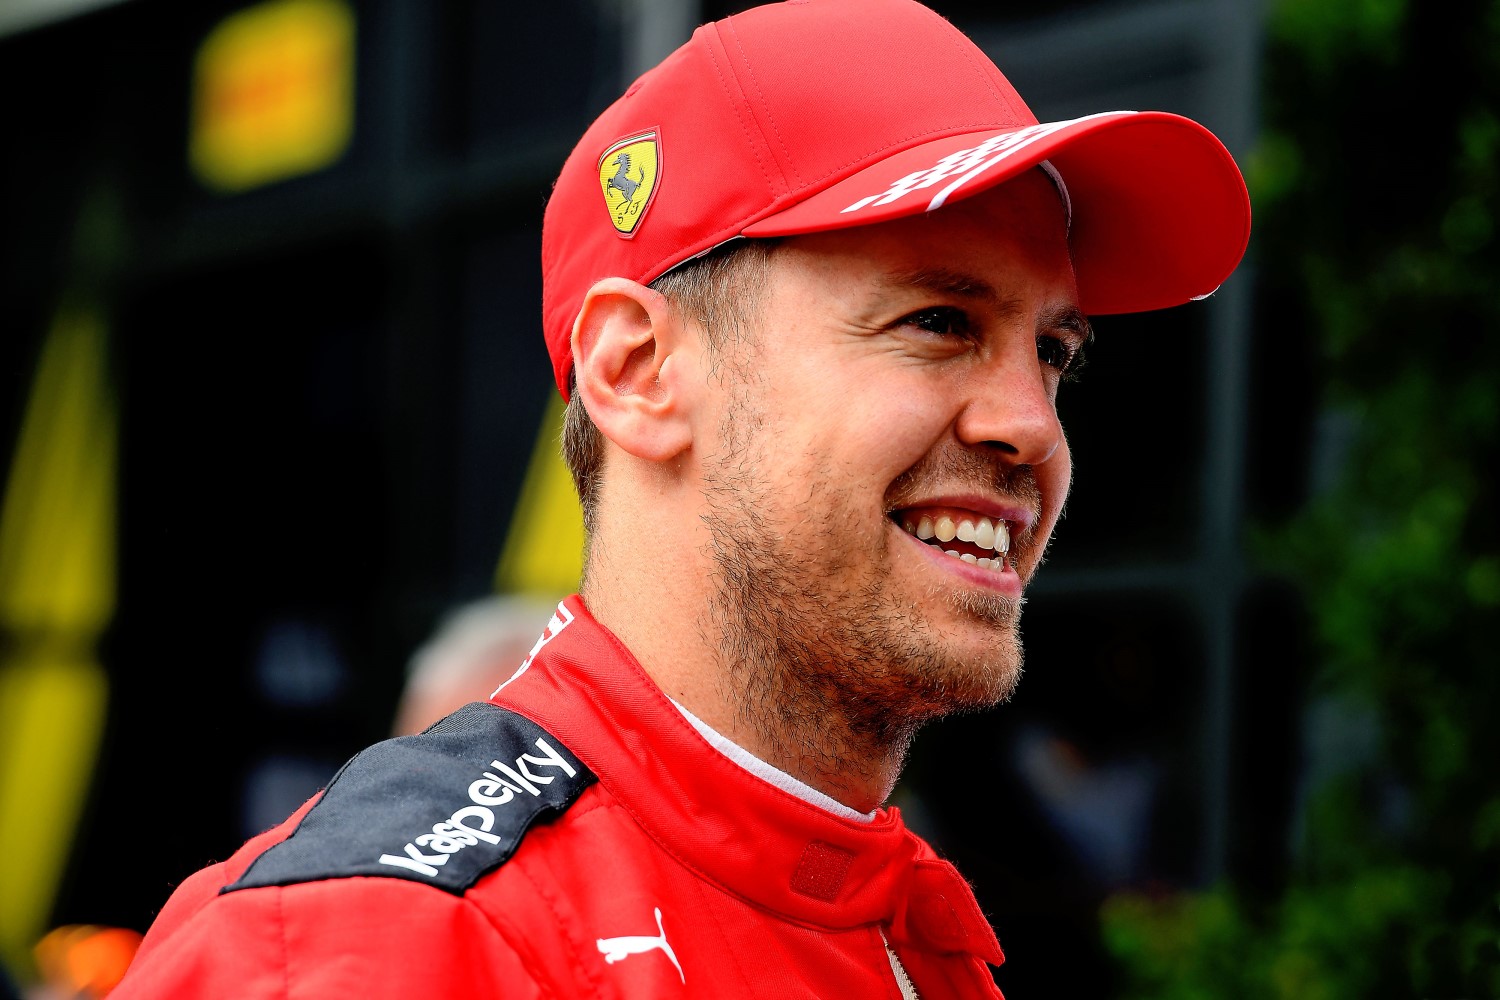 After Vettel's exit at end of year there will be no German drivers in F1, so RTL's ratings would drop